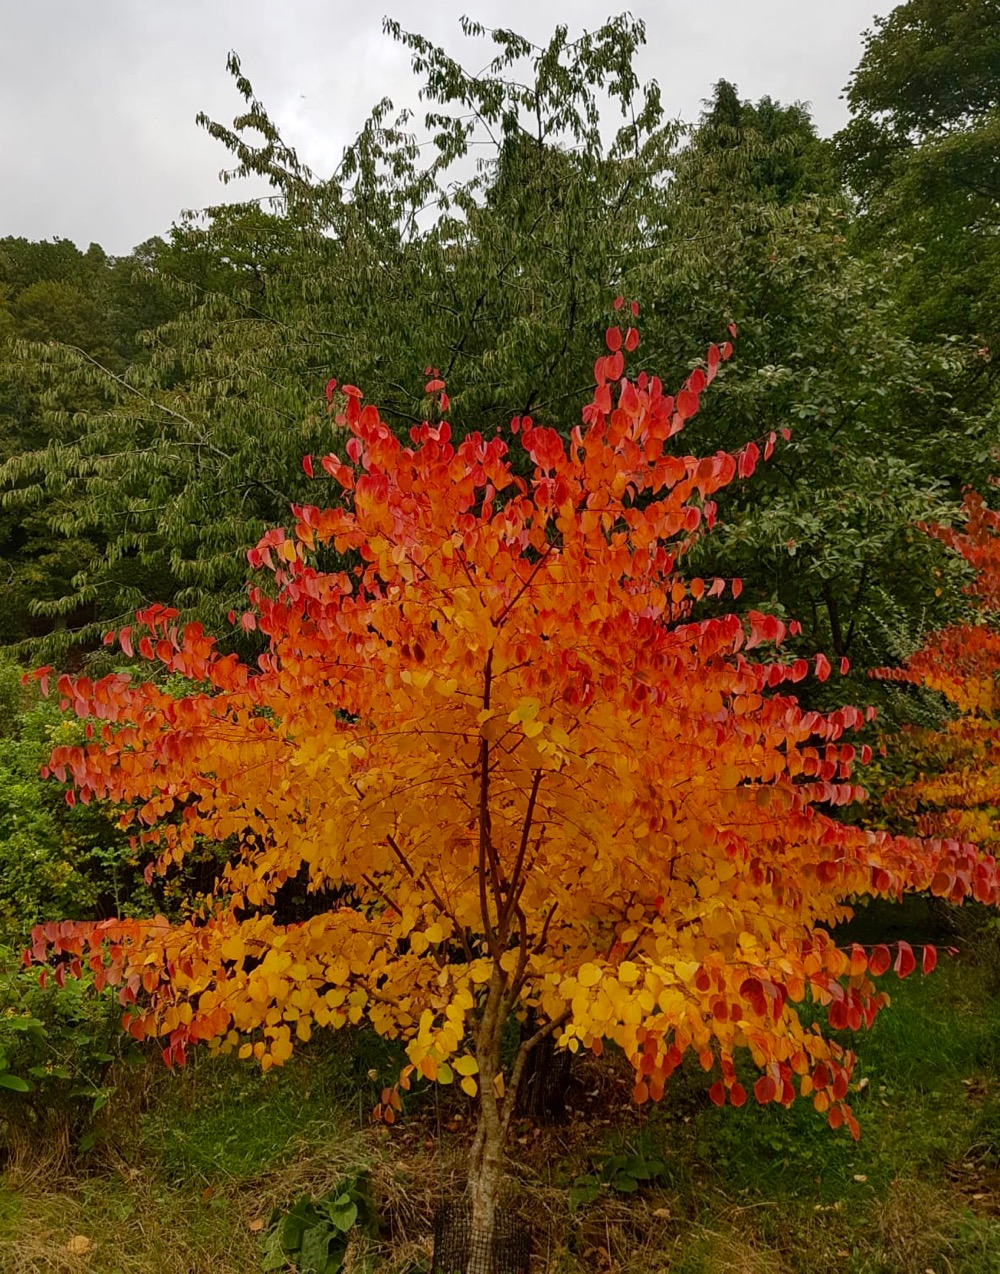 flaming Cercidiphyllum at Logie steading